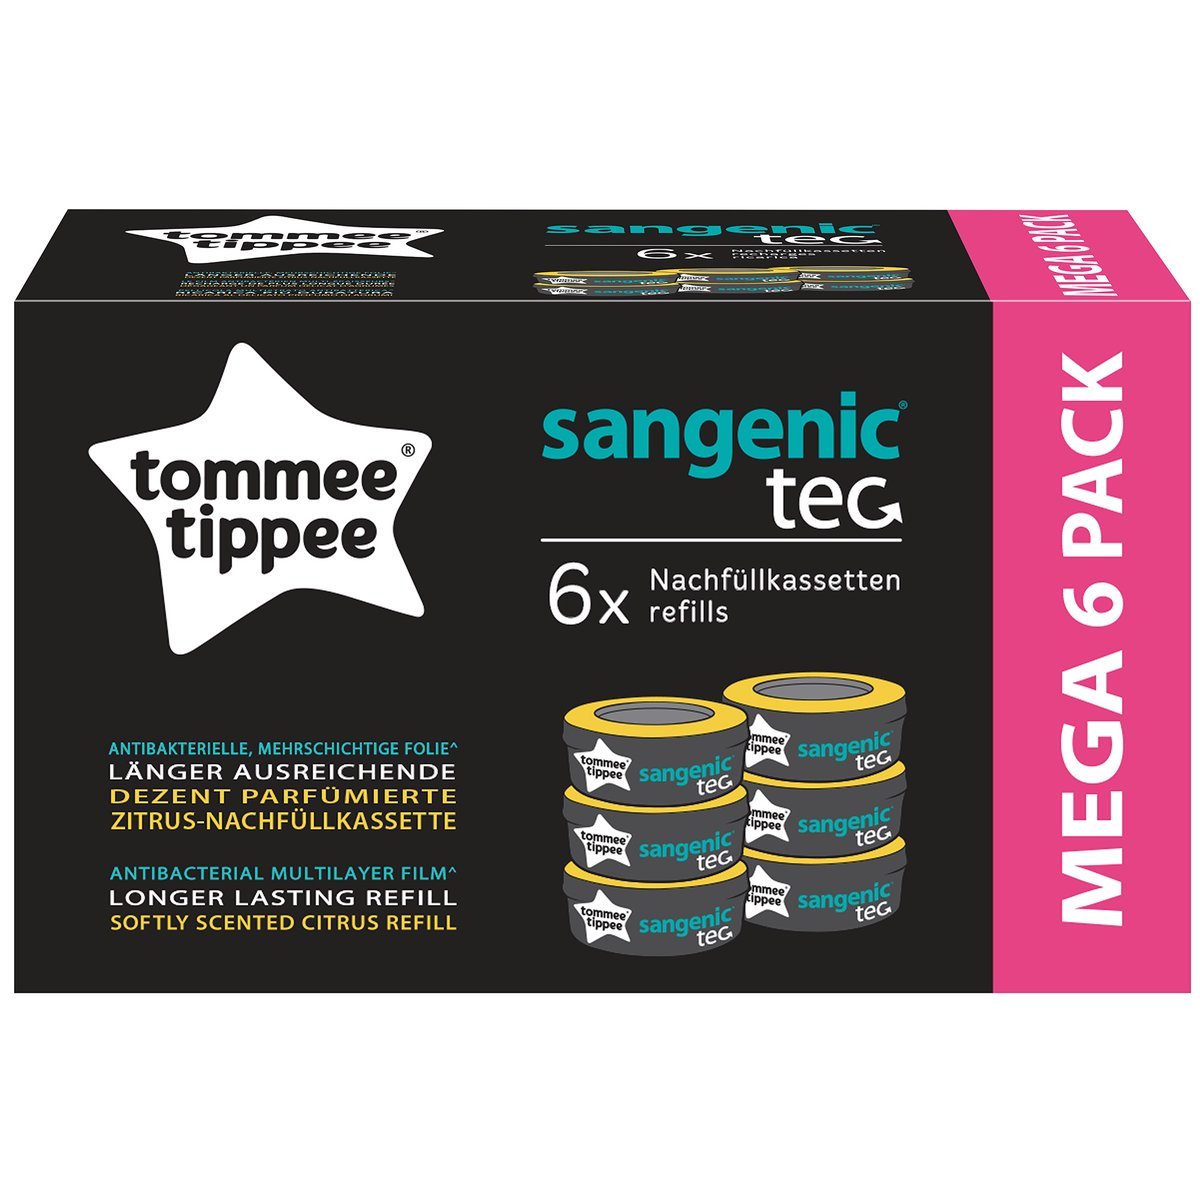 Tommee Tippee Sangenic tec refill cassettes (pack of 6) - multi-layer film for nappy storage - suitable for many Sangenic models